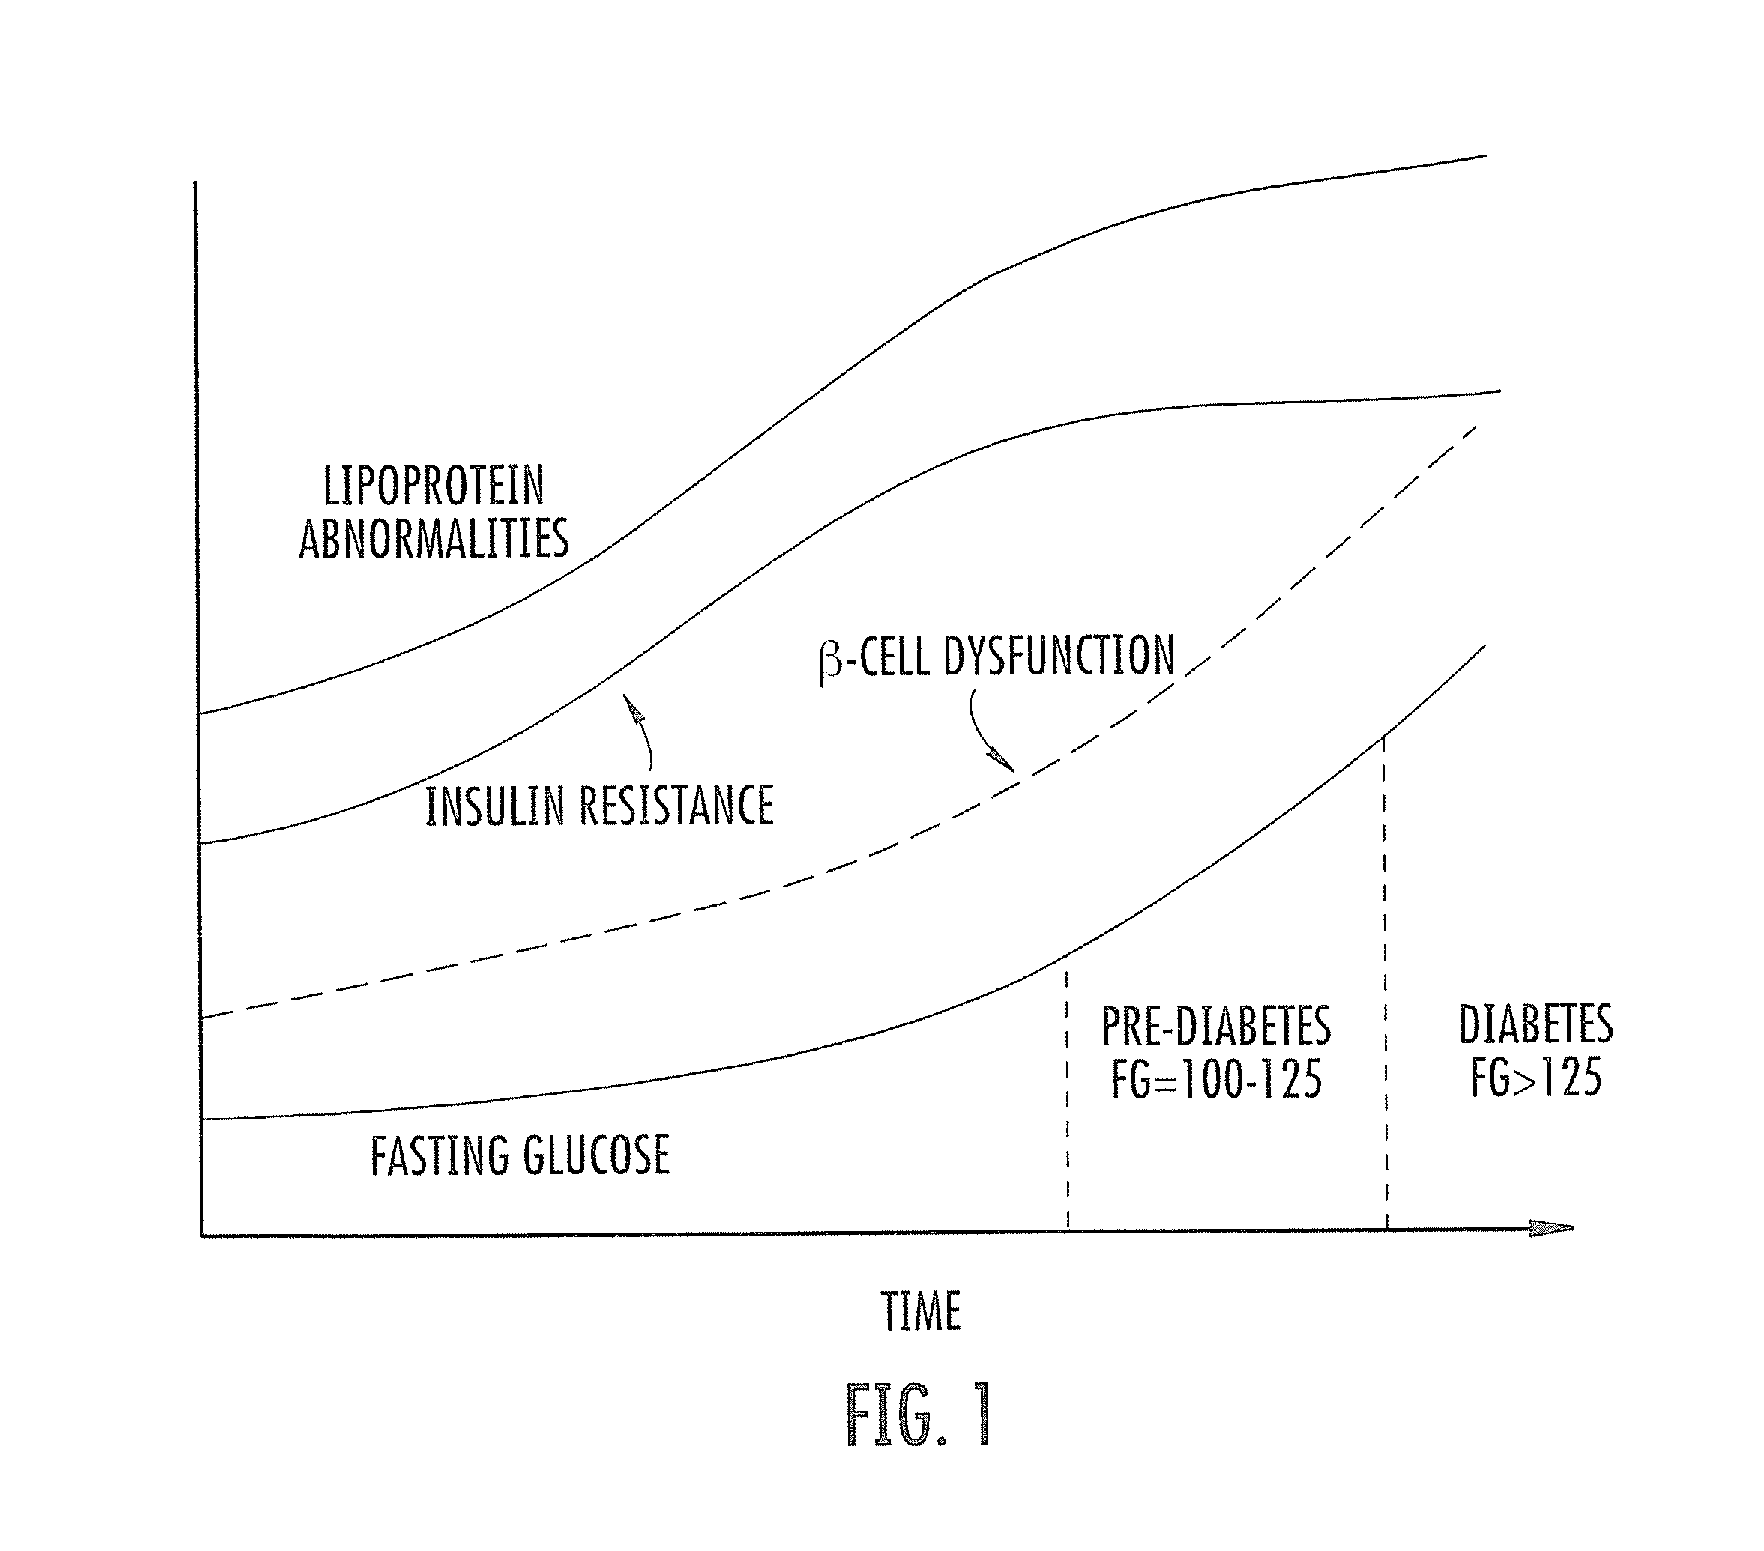 Lipoprotein insulin resistance indexes and related methods, systems and computer programs for generating same